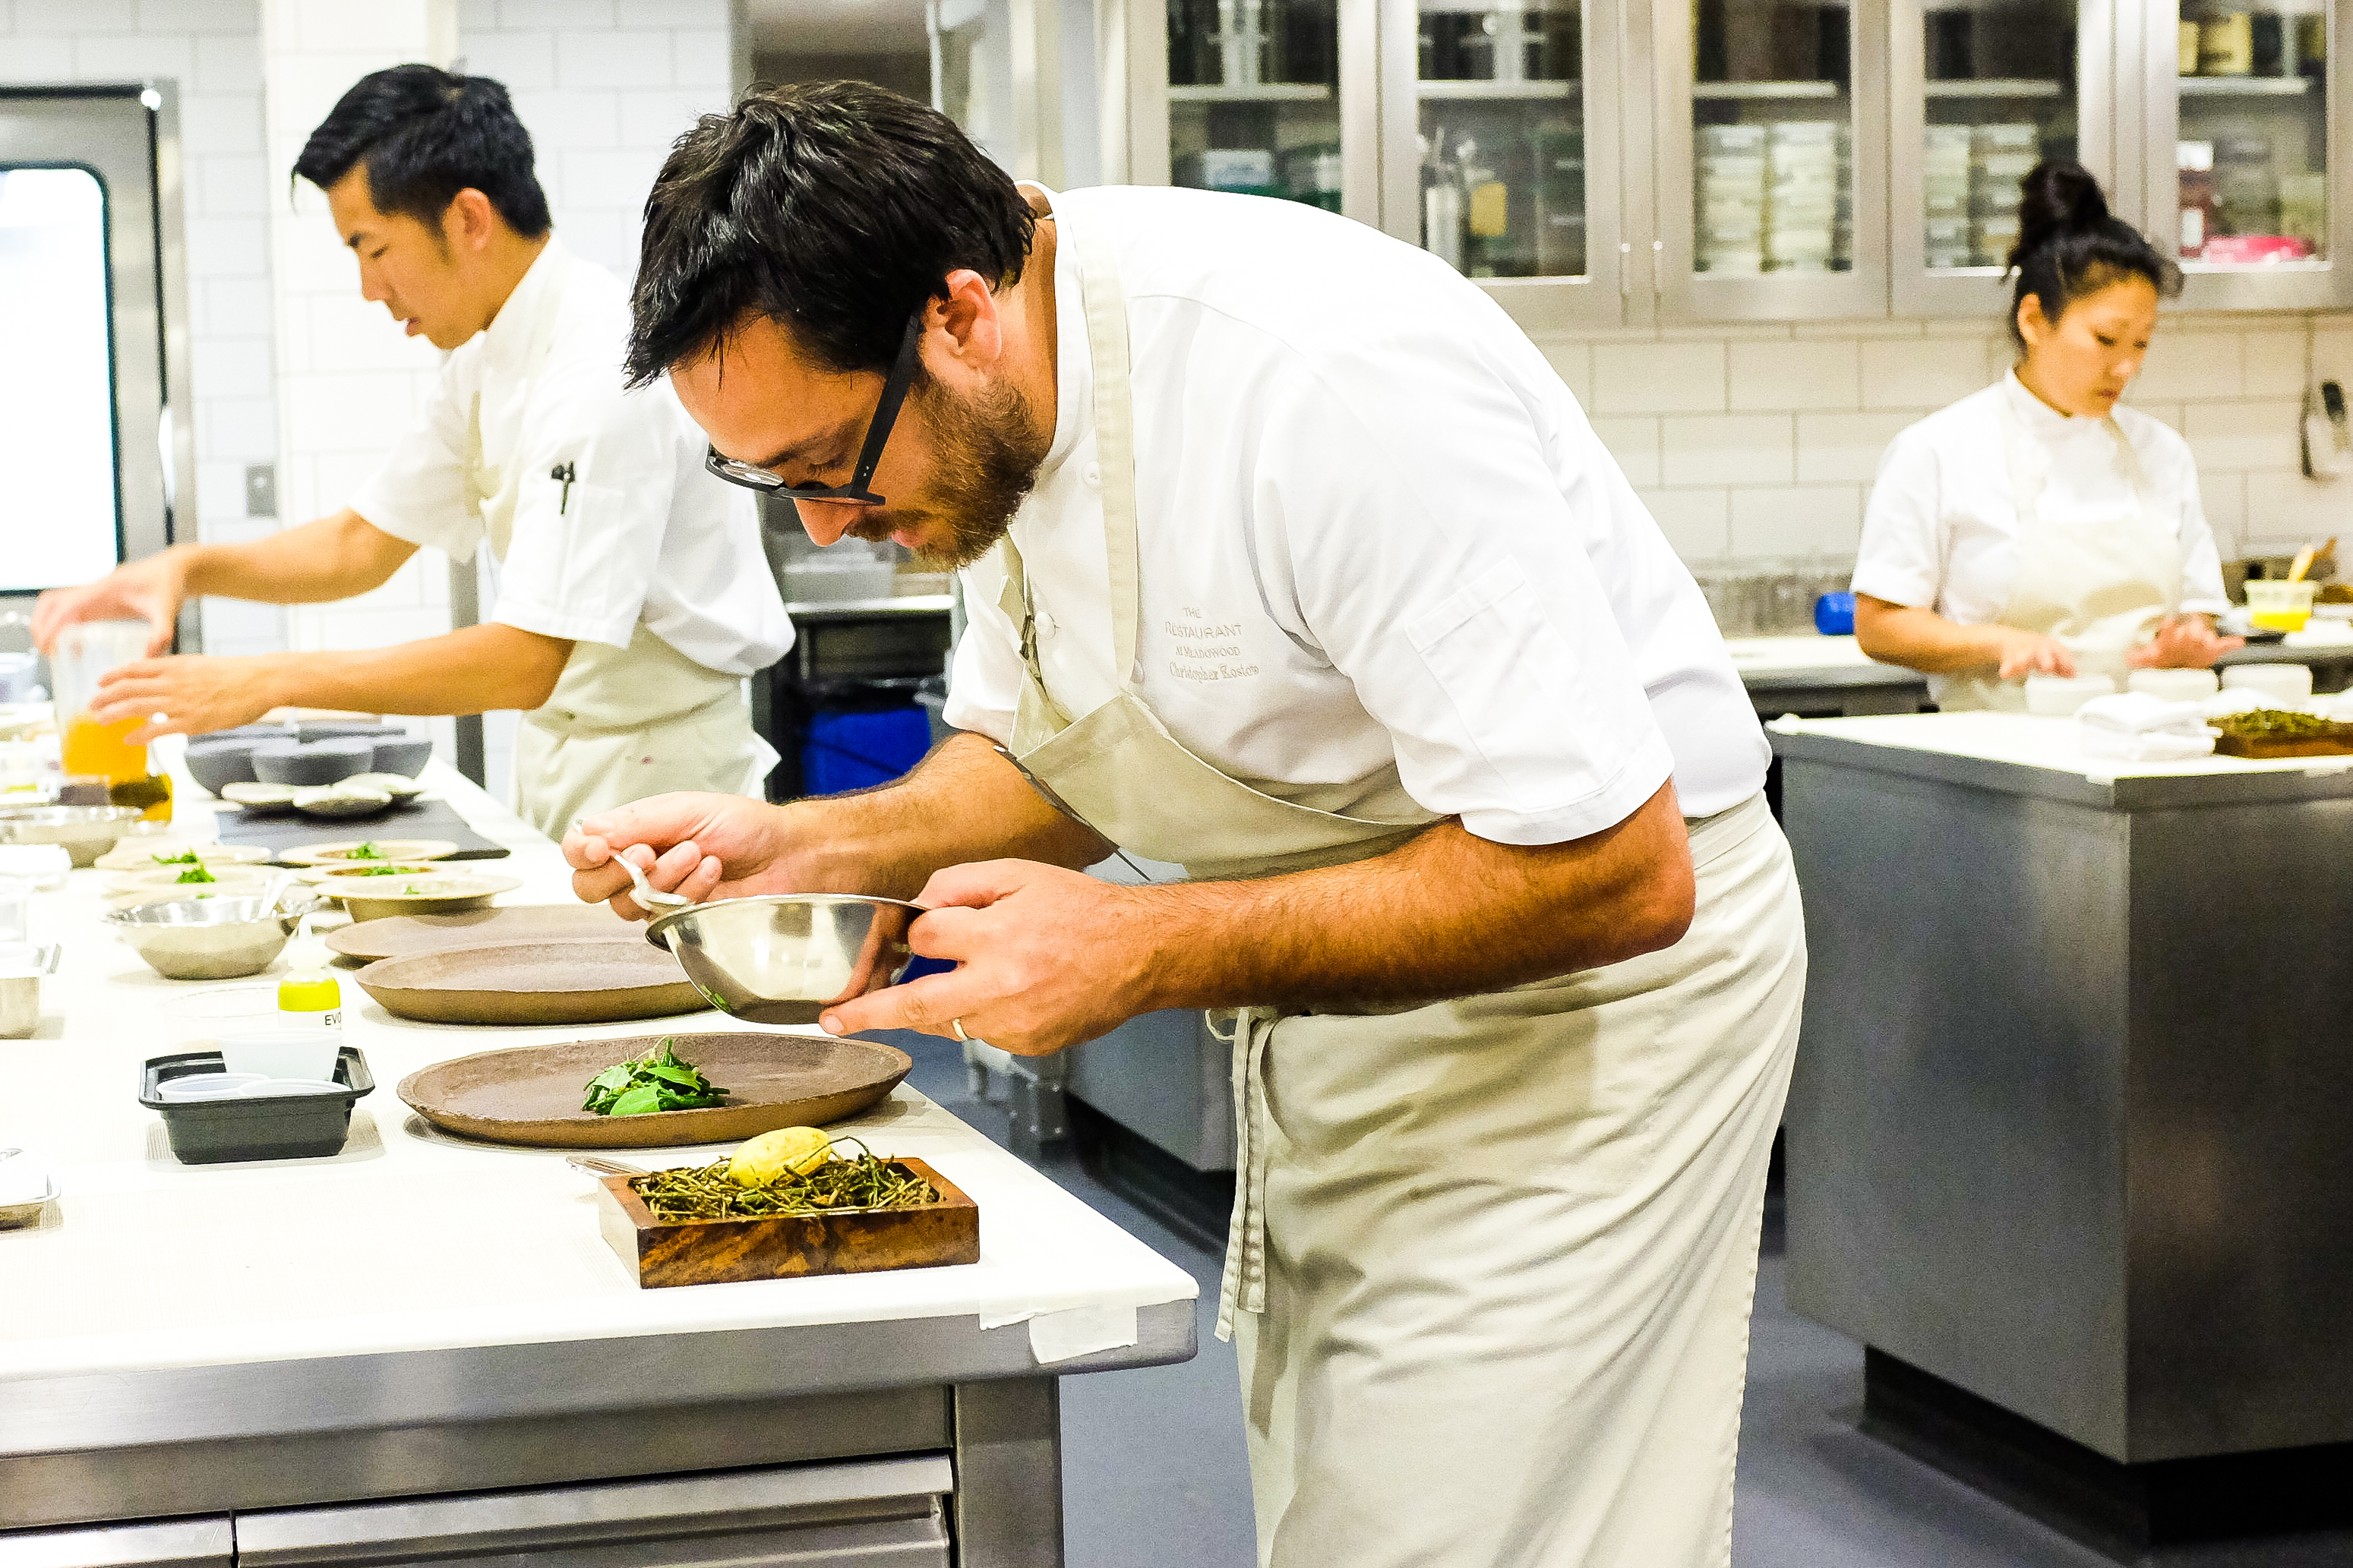 Chef Chris Kostow in the kitchen at The Restaurant at Meadowood